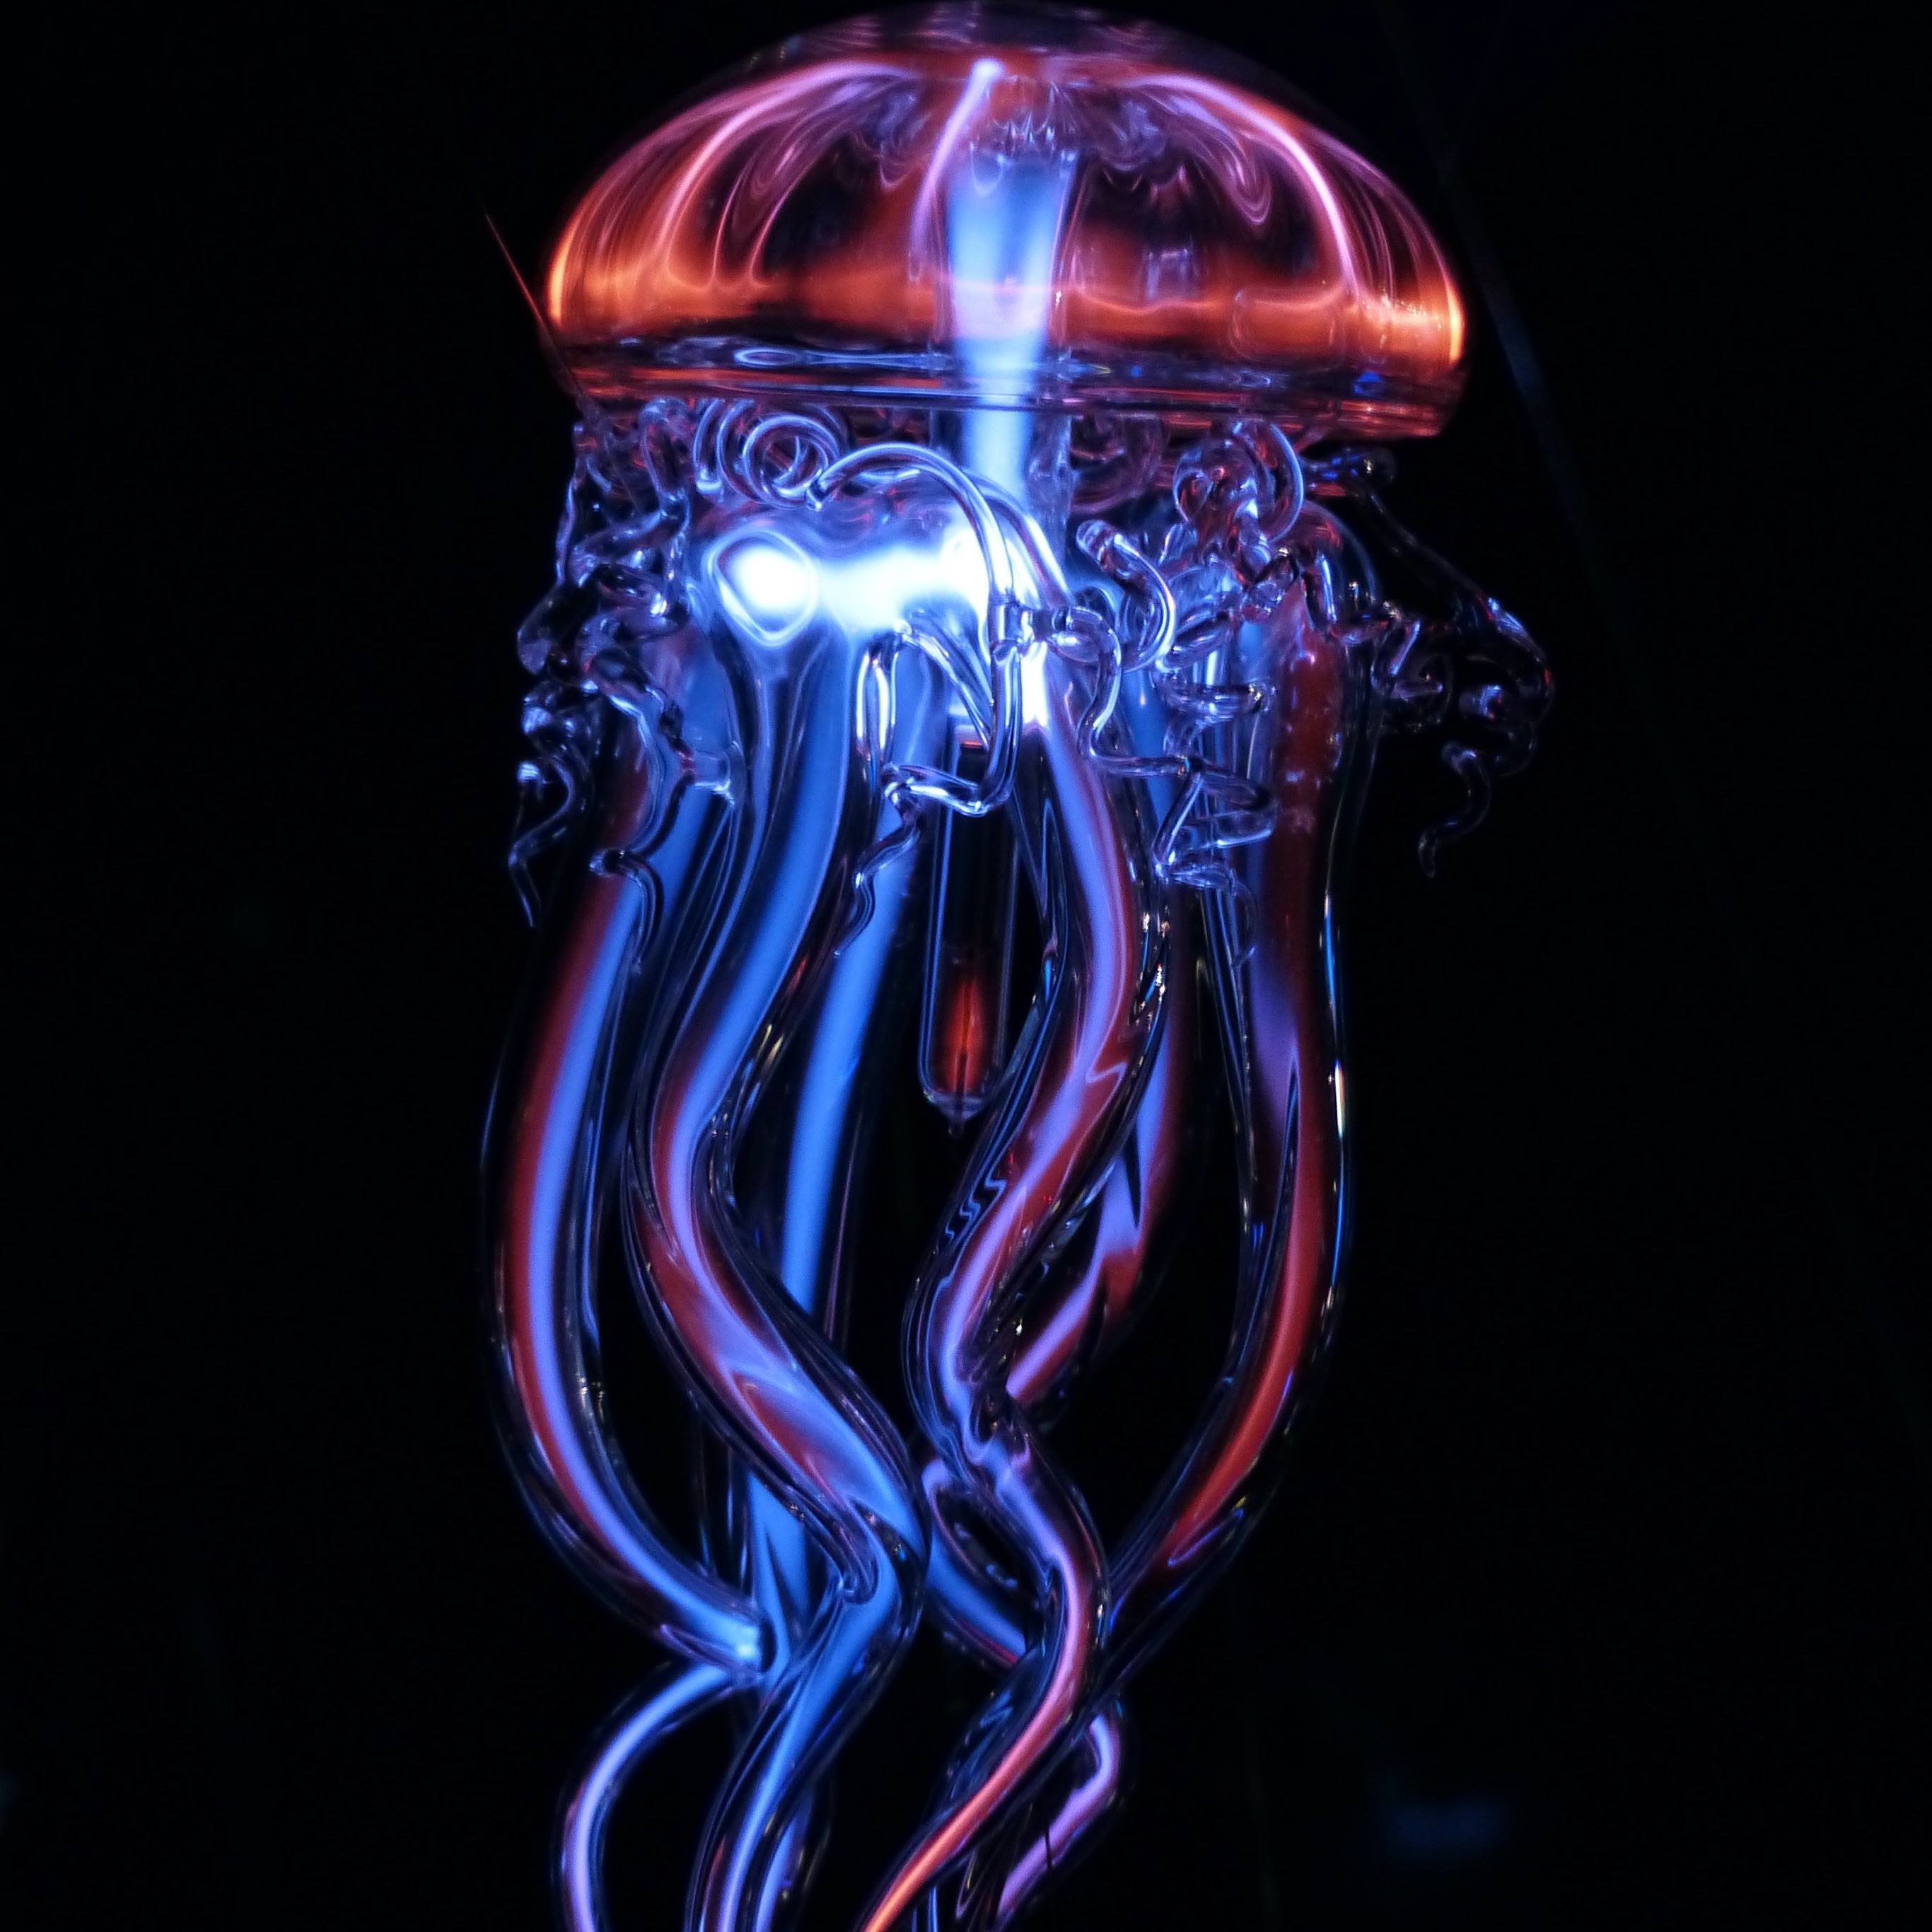 Wallpaper Weekends: Jellyfish iPhone and iPad Wallpapers